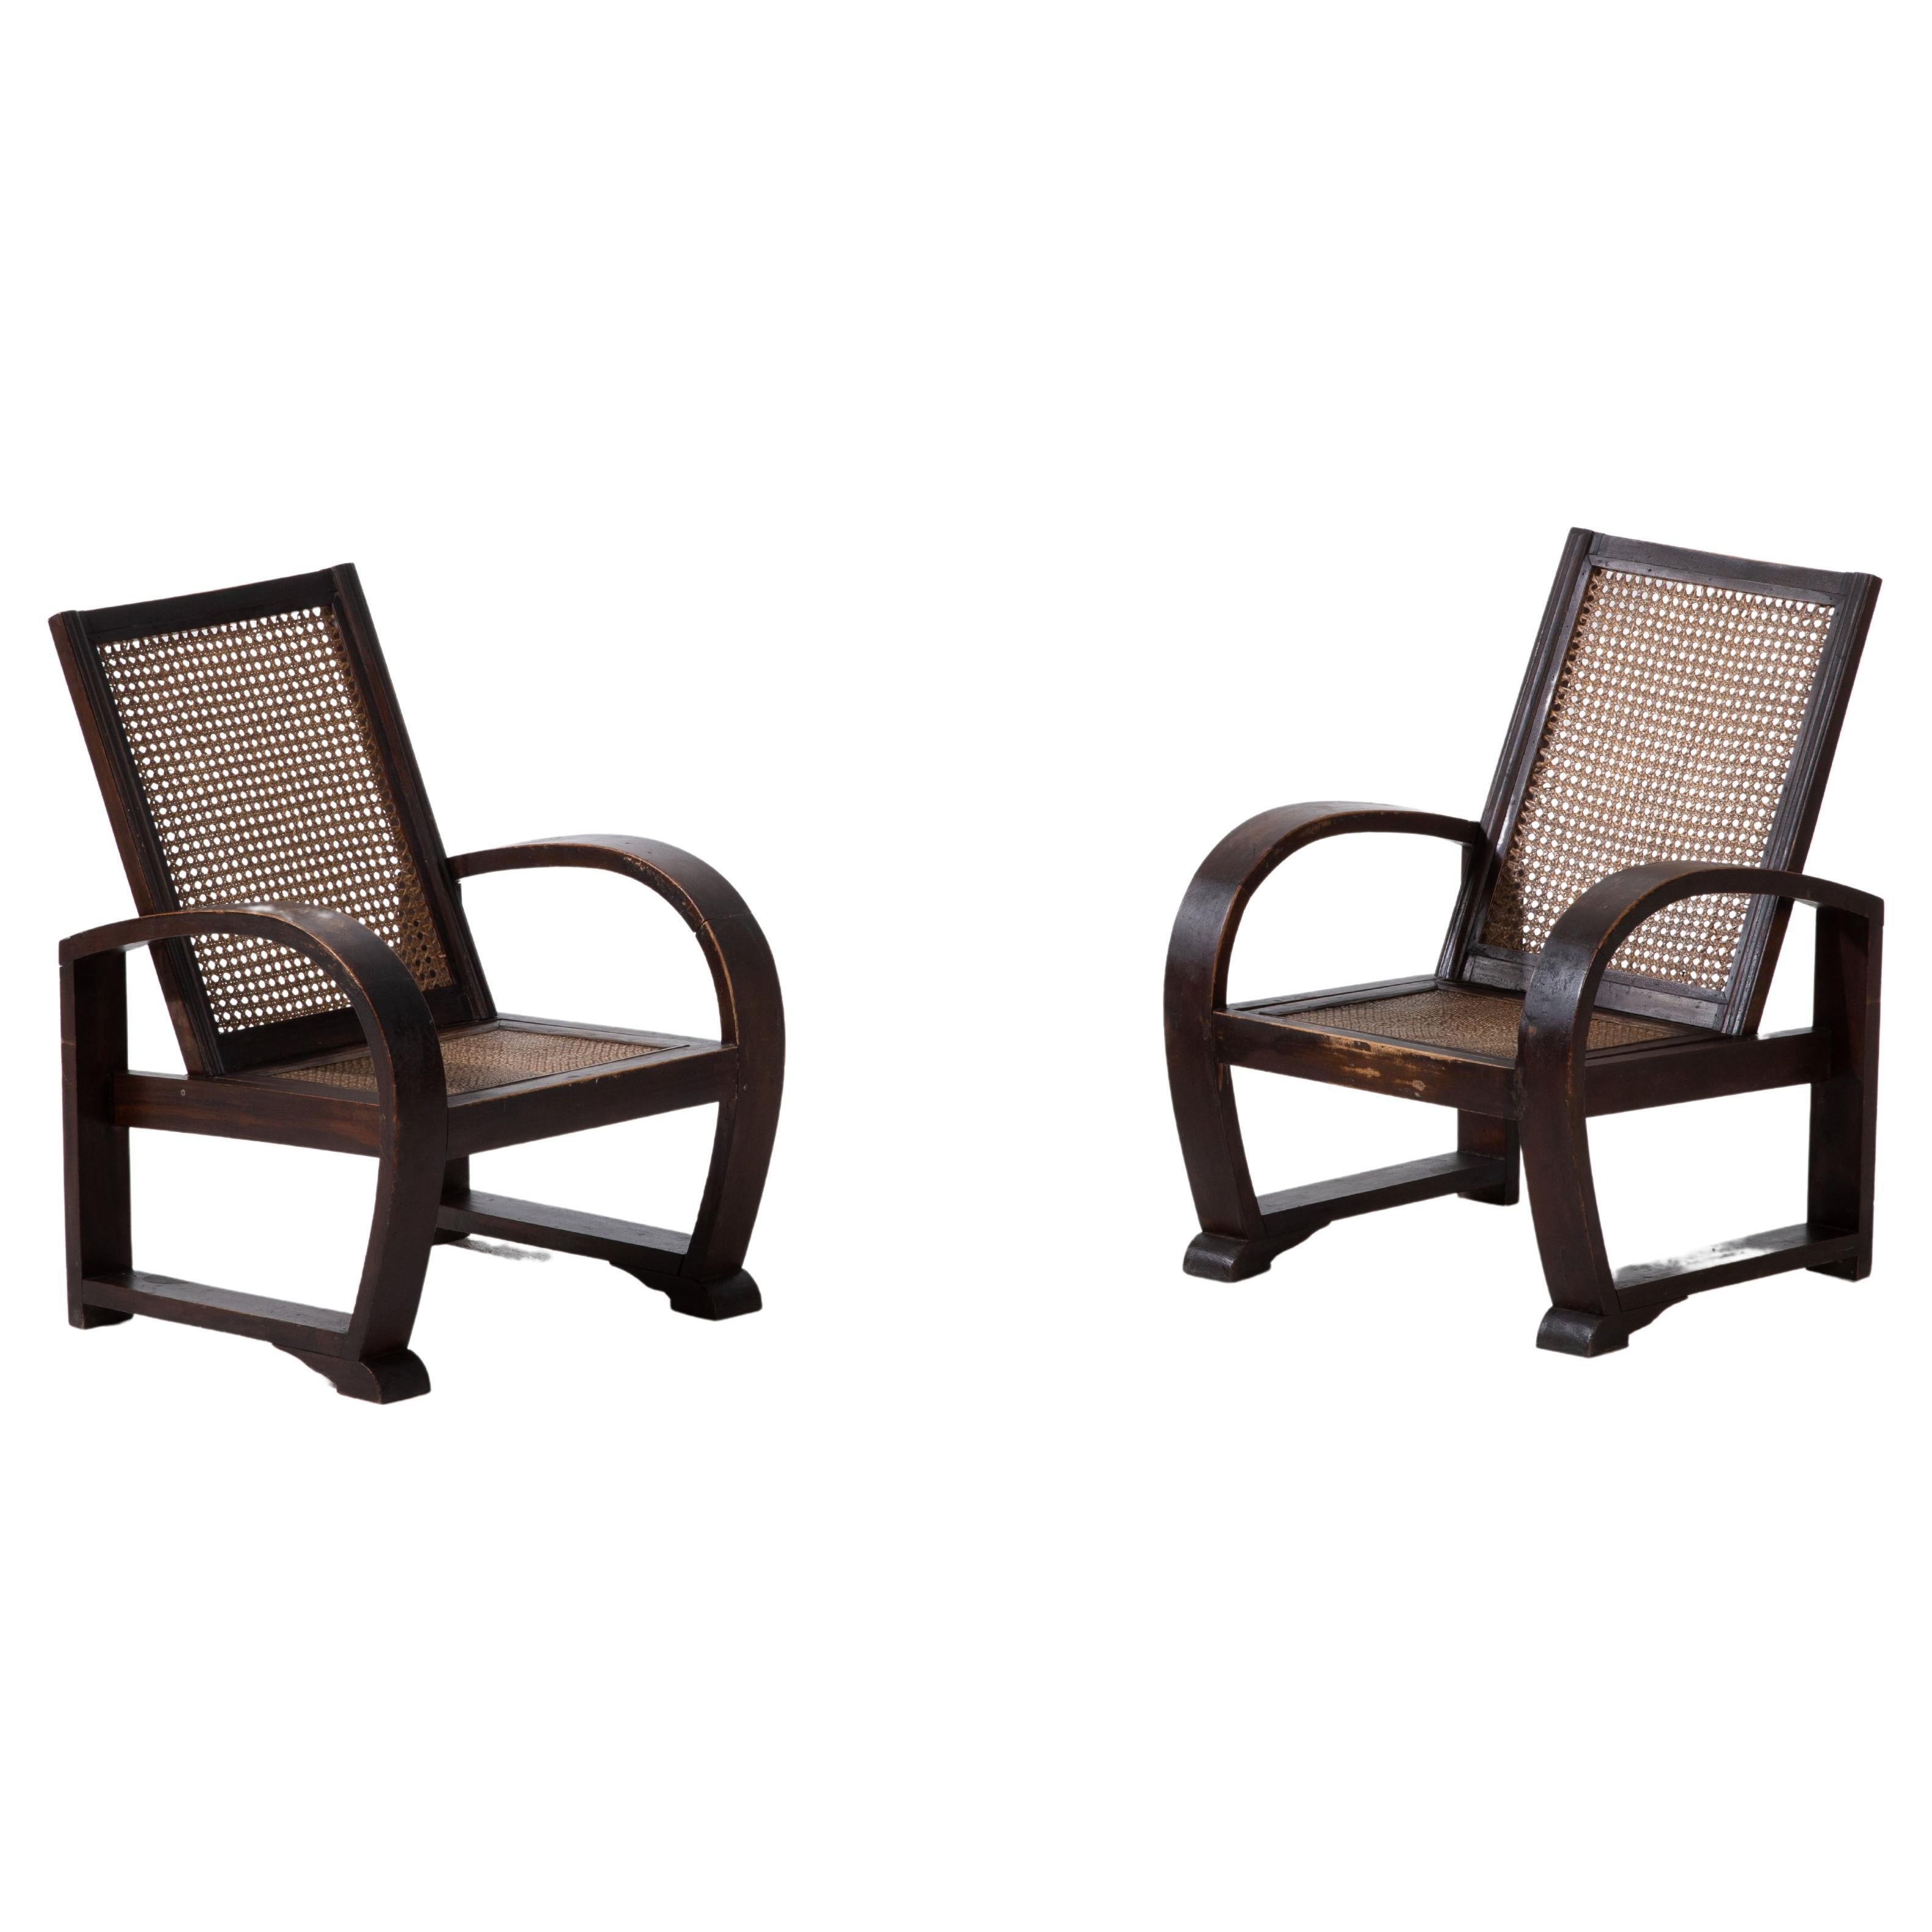 Set of Two Reconstruction Walnut Armchairs, 1940s, France